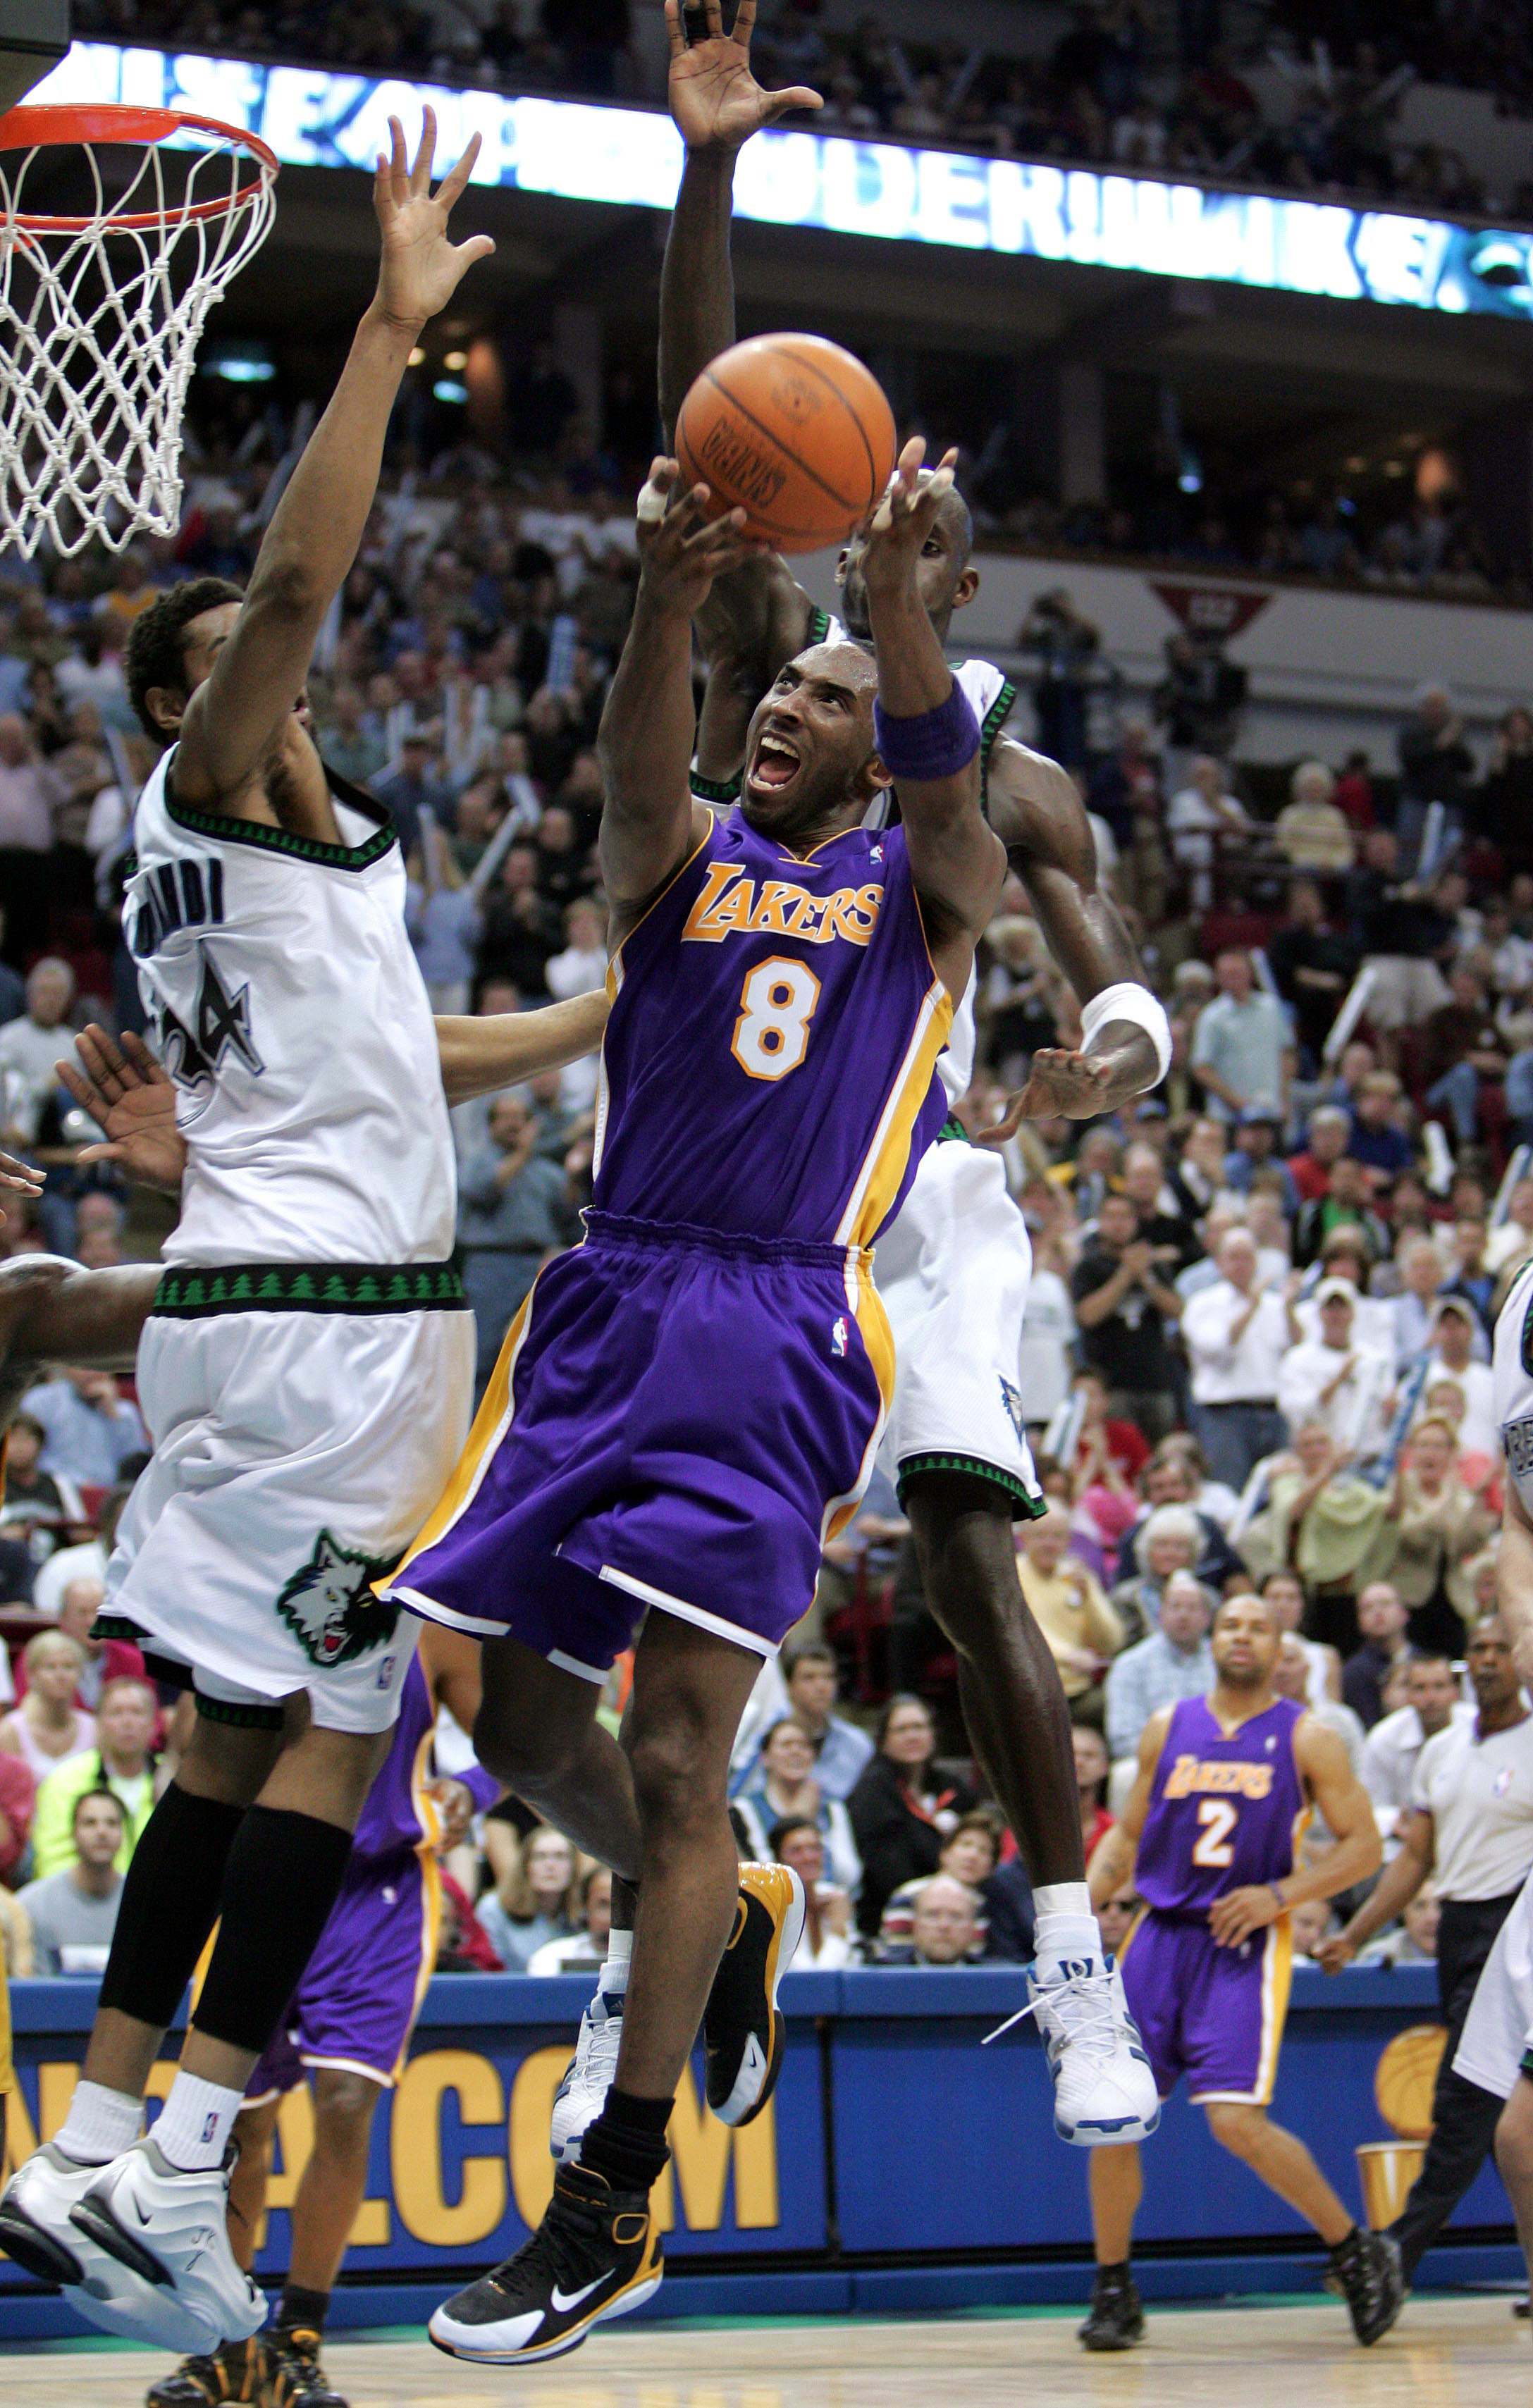 MINNEAPOLIS - MAY 29:  Kobe Bryant #8 of the Los Angeles Lakers goes to the basket under pressure from the Minnesota Timberwolves in the frist half of Game five of the Western Conference Finals during the 2004 NBA Playoffs on May 29, 2004 at Target Center